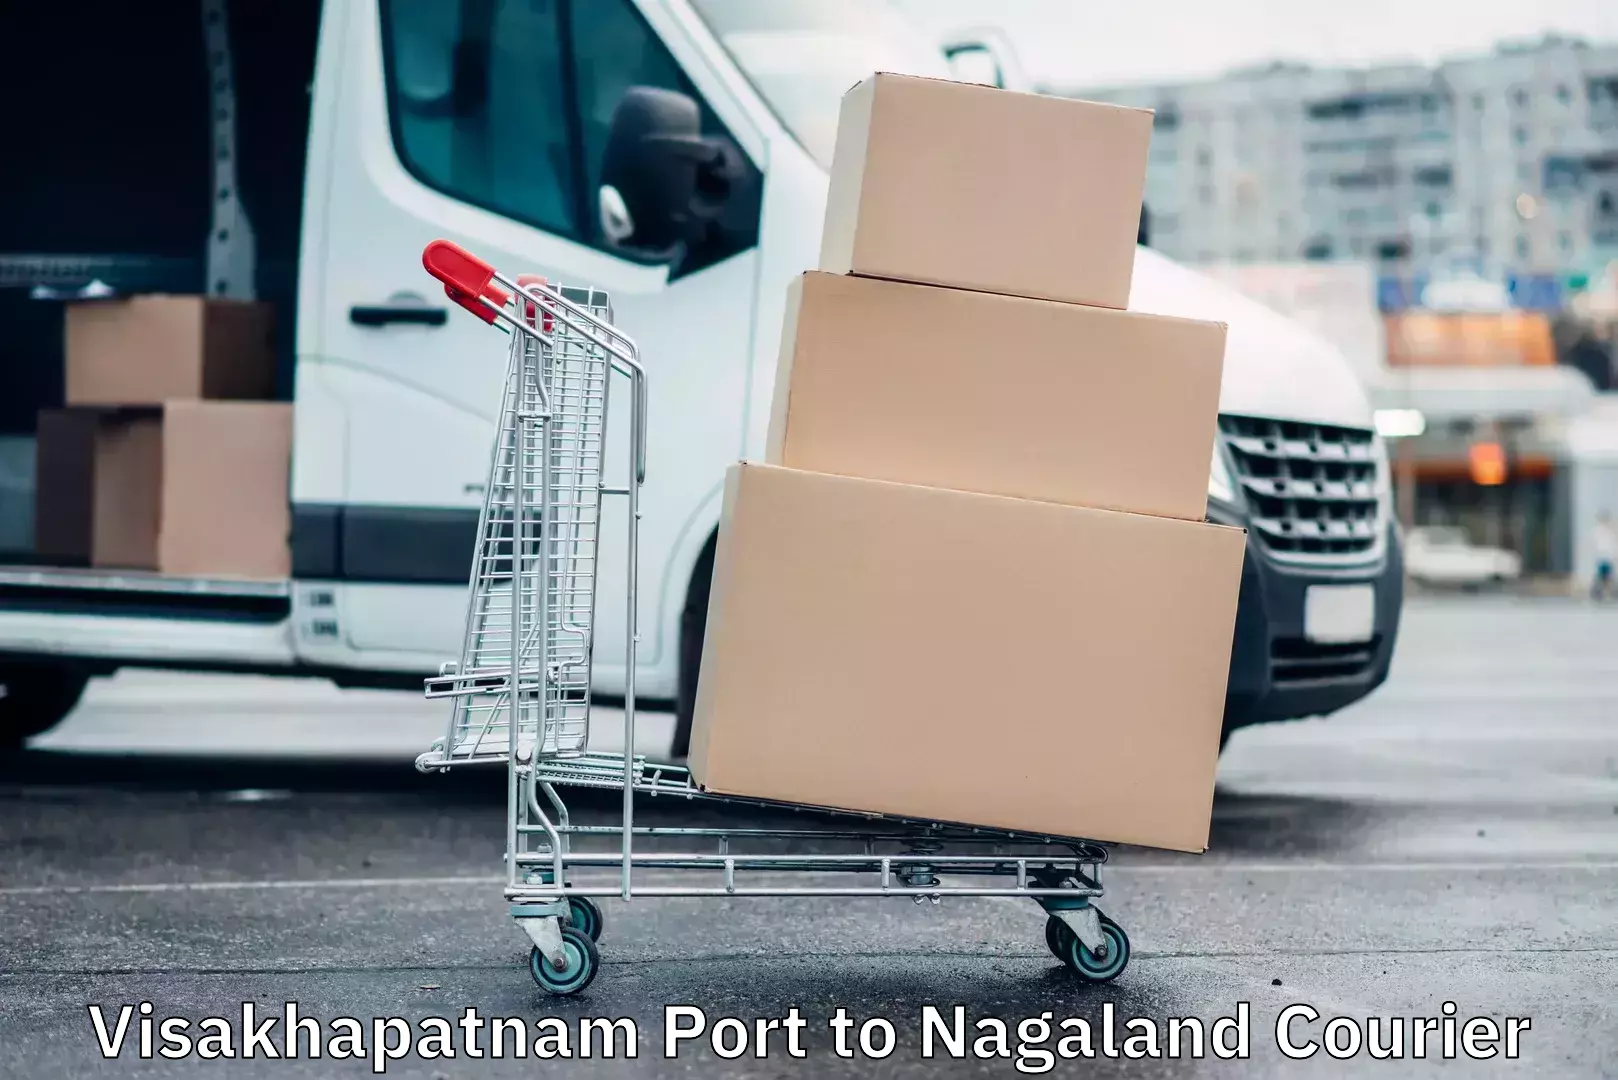 Efficient package consolidation Visakhapatnam Port to Nagaland